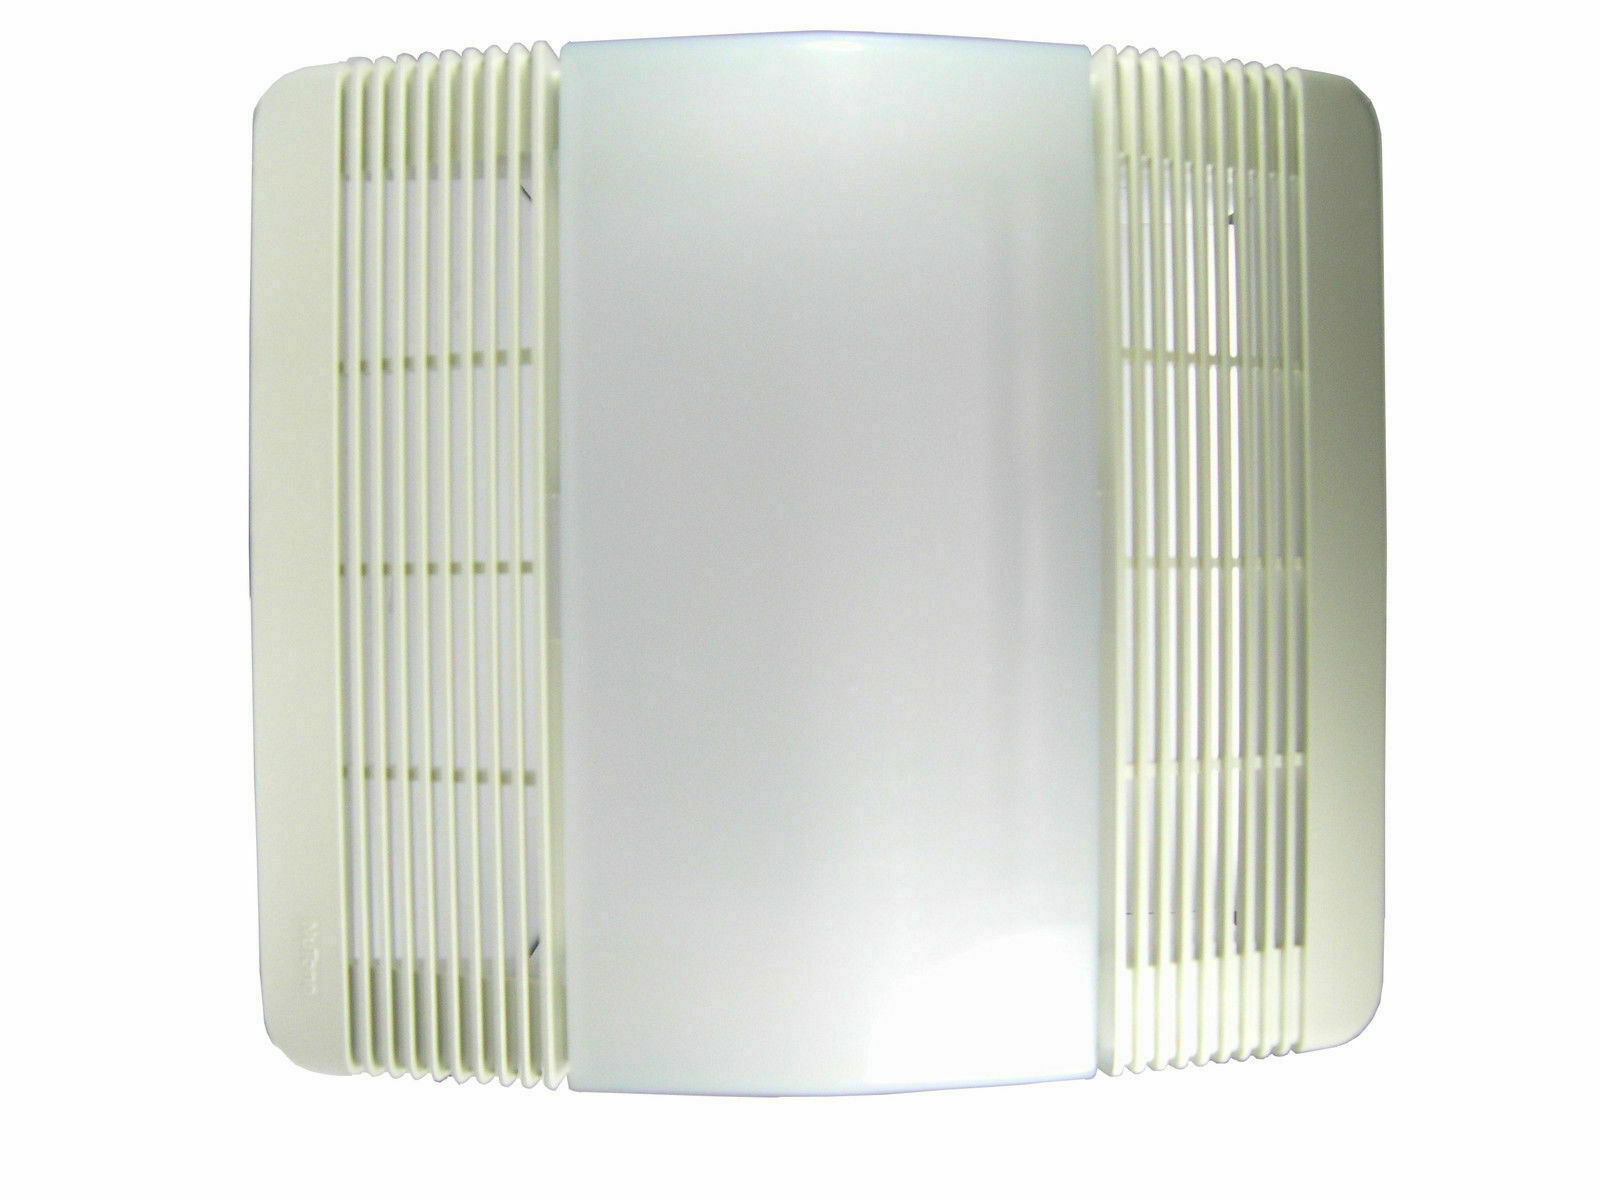 85315000 Nutone Grille Light Lens For Bathroom Fan Exhaust 763rln 769rln for size 1600 X 1200